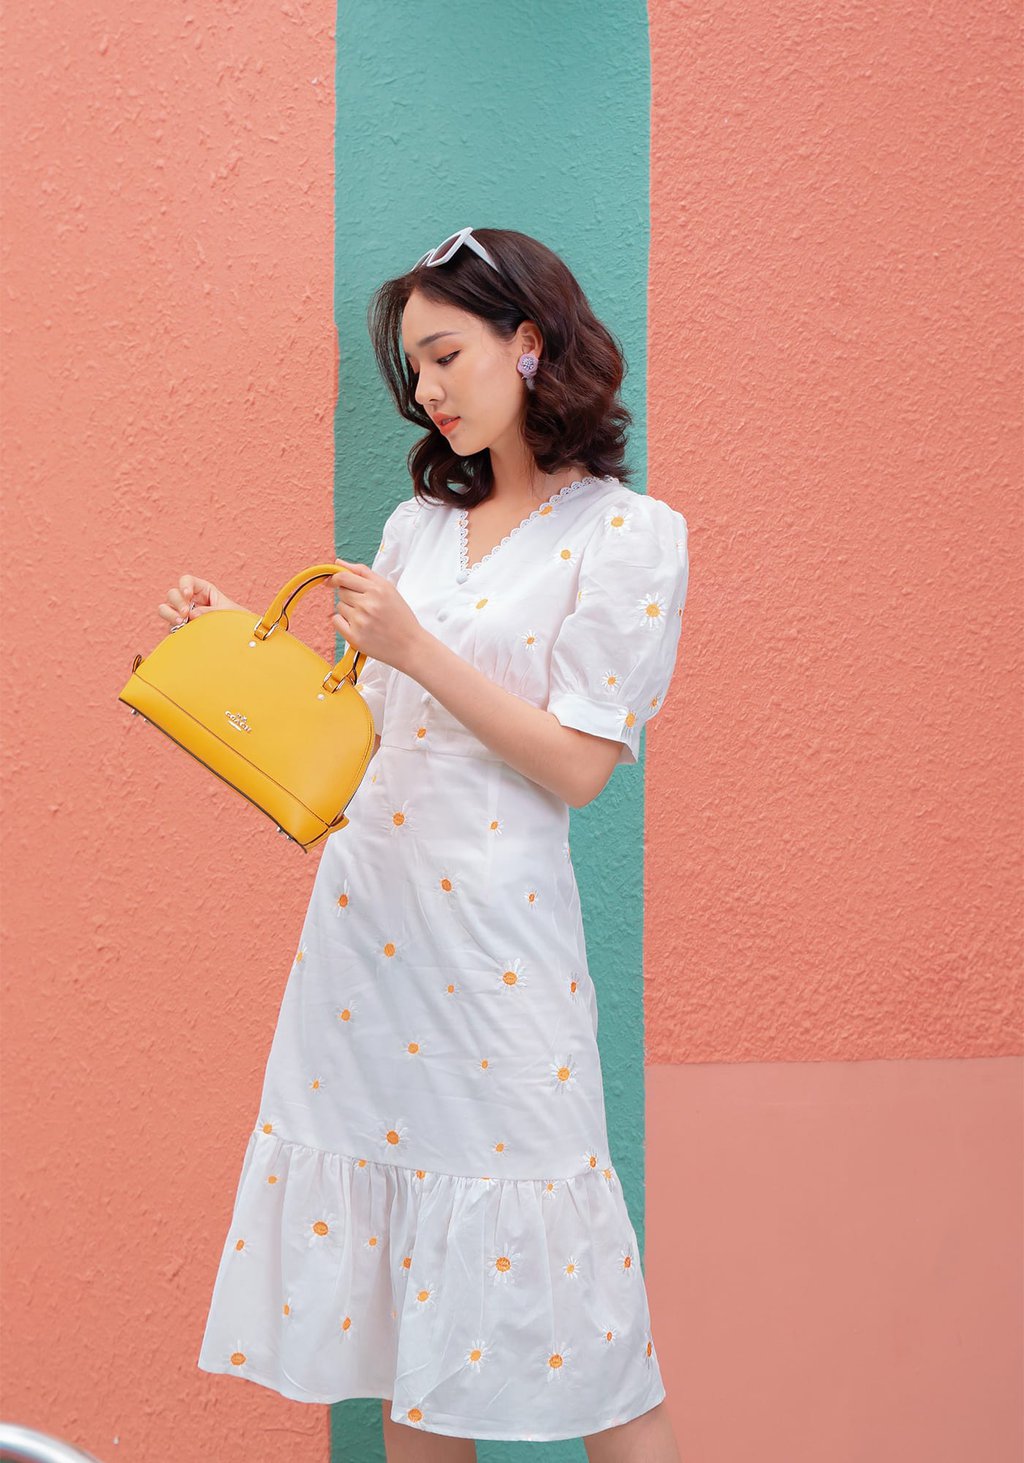 The Cutest Summer Outfits for Women We'll Be Wearing on Repeat